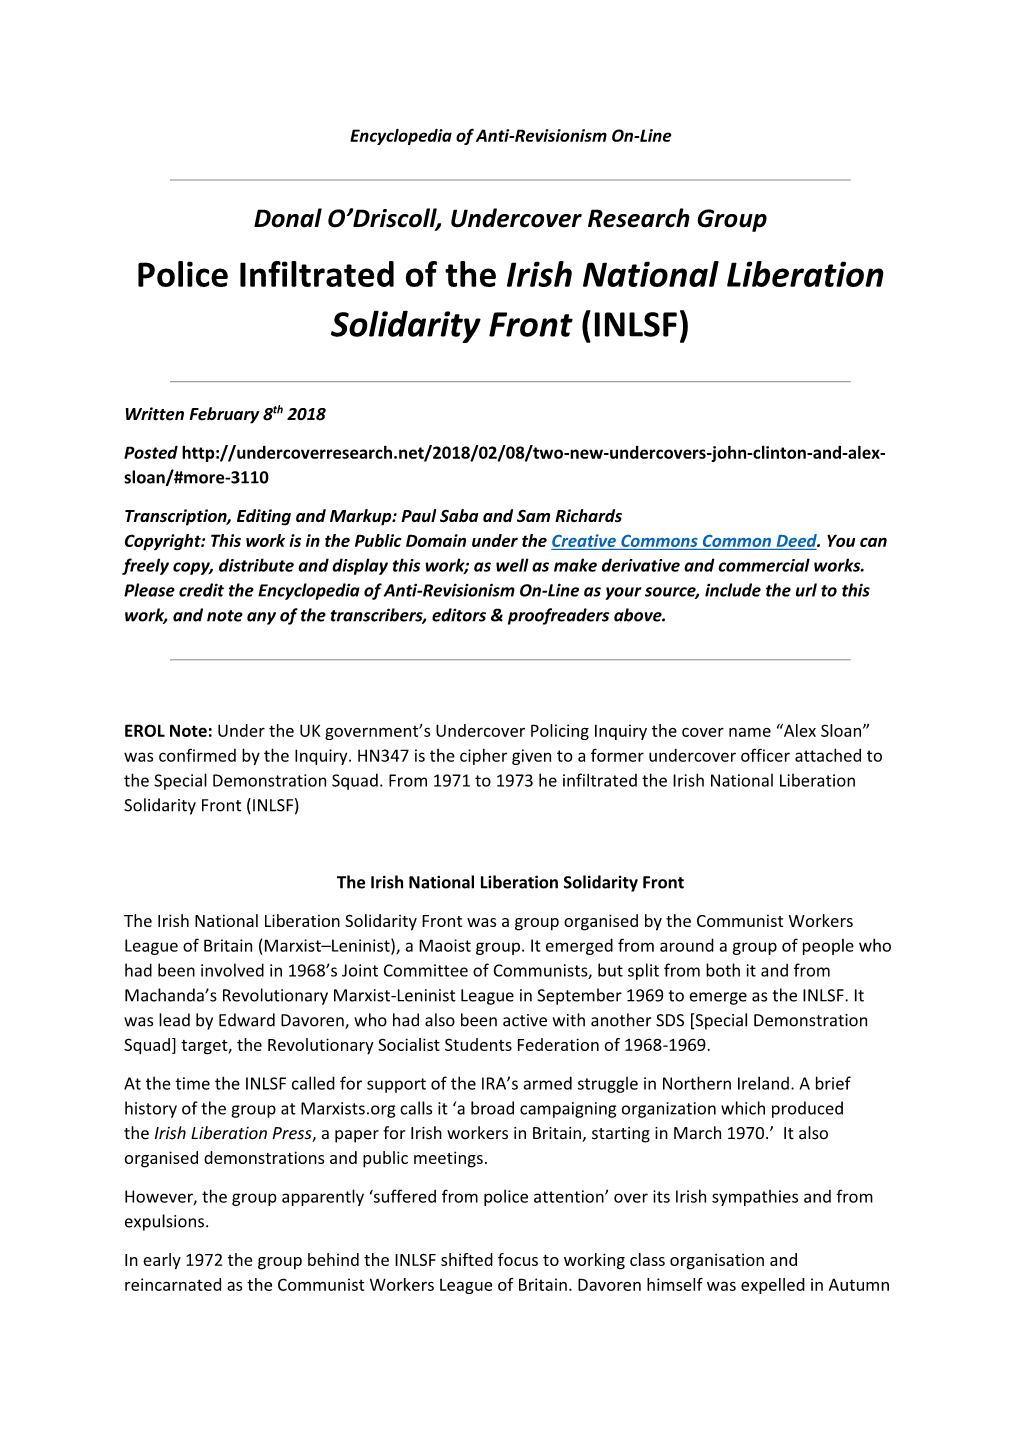 Police Infiltrated of the Irish National Liberation Solidarity Front (INLSF)